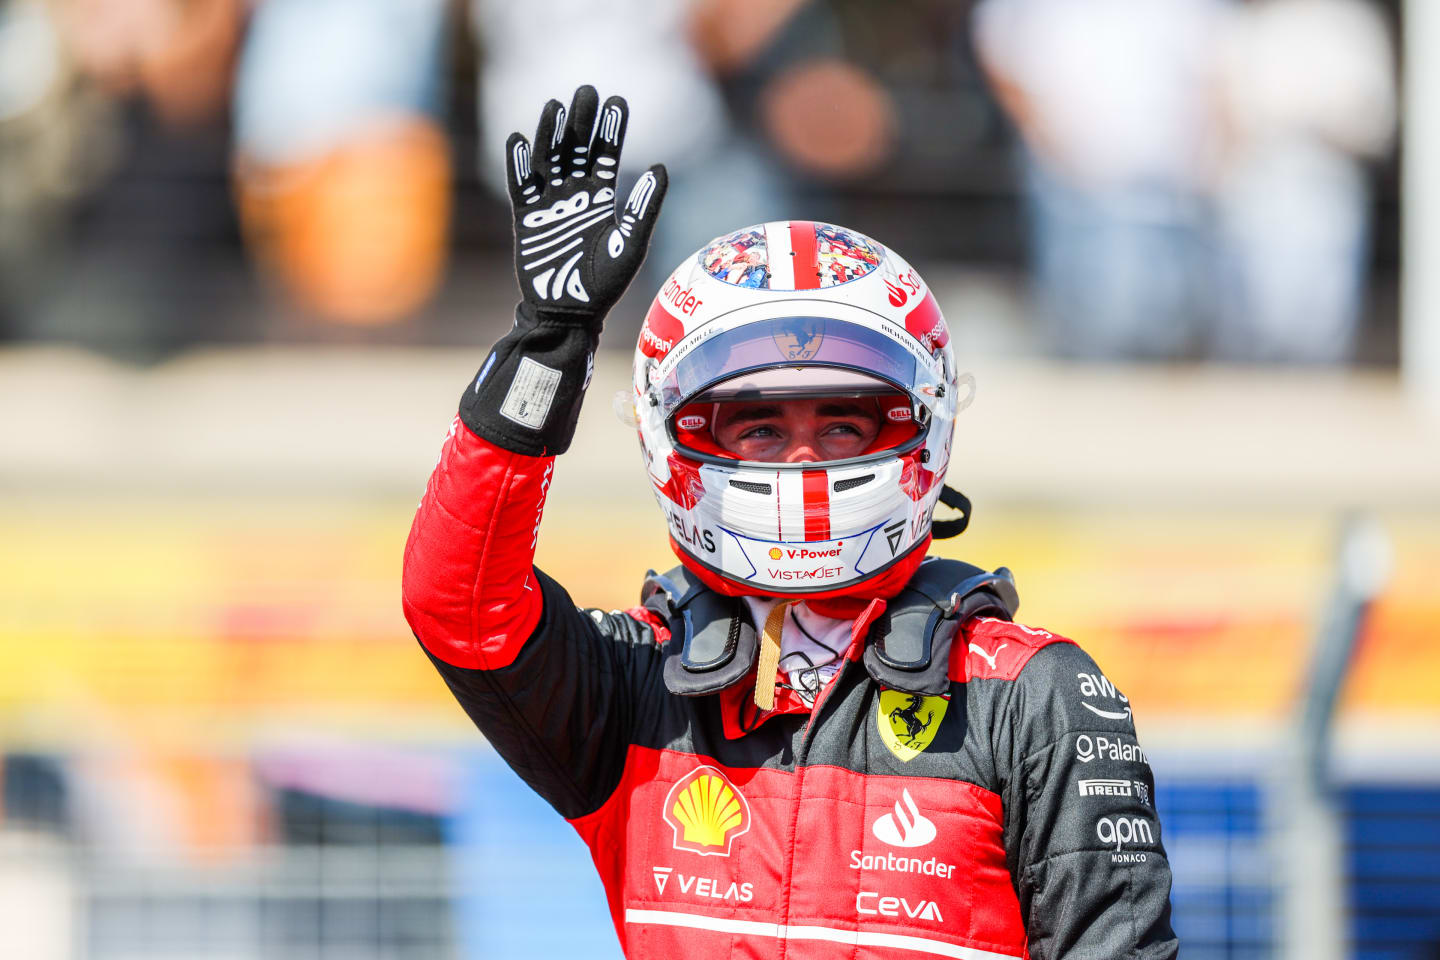 LE CASTELLET, FRANCE - JULY 23: Charles Leclerc of Ferrari and Monaco celebrates pole position during qualifying ahead of the F1 Grand Prix of France at Circuit Paul Ricard on July 23, 2022 in Le Castellet, France. (Photo by Peter J Fox/Getty Images)